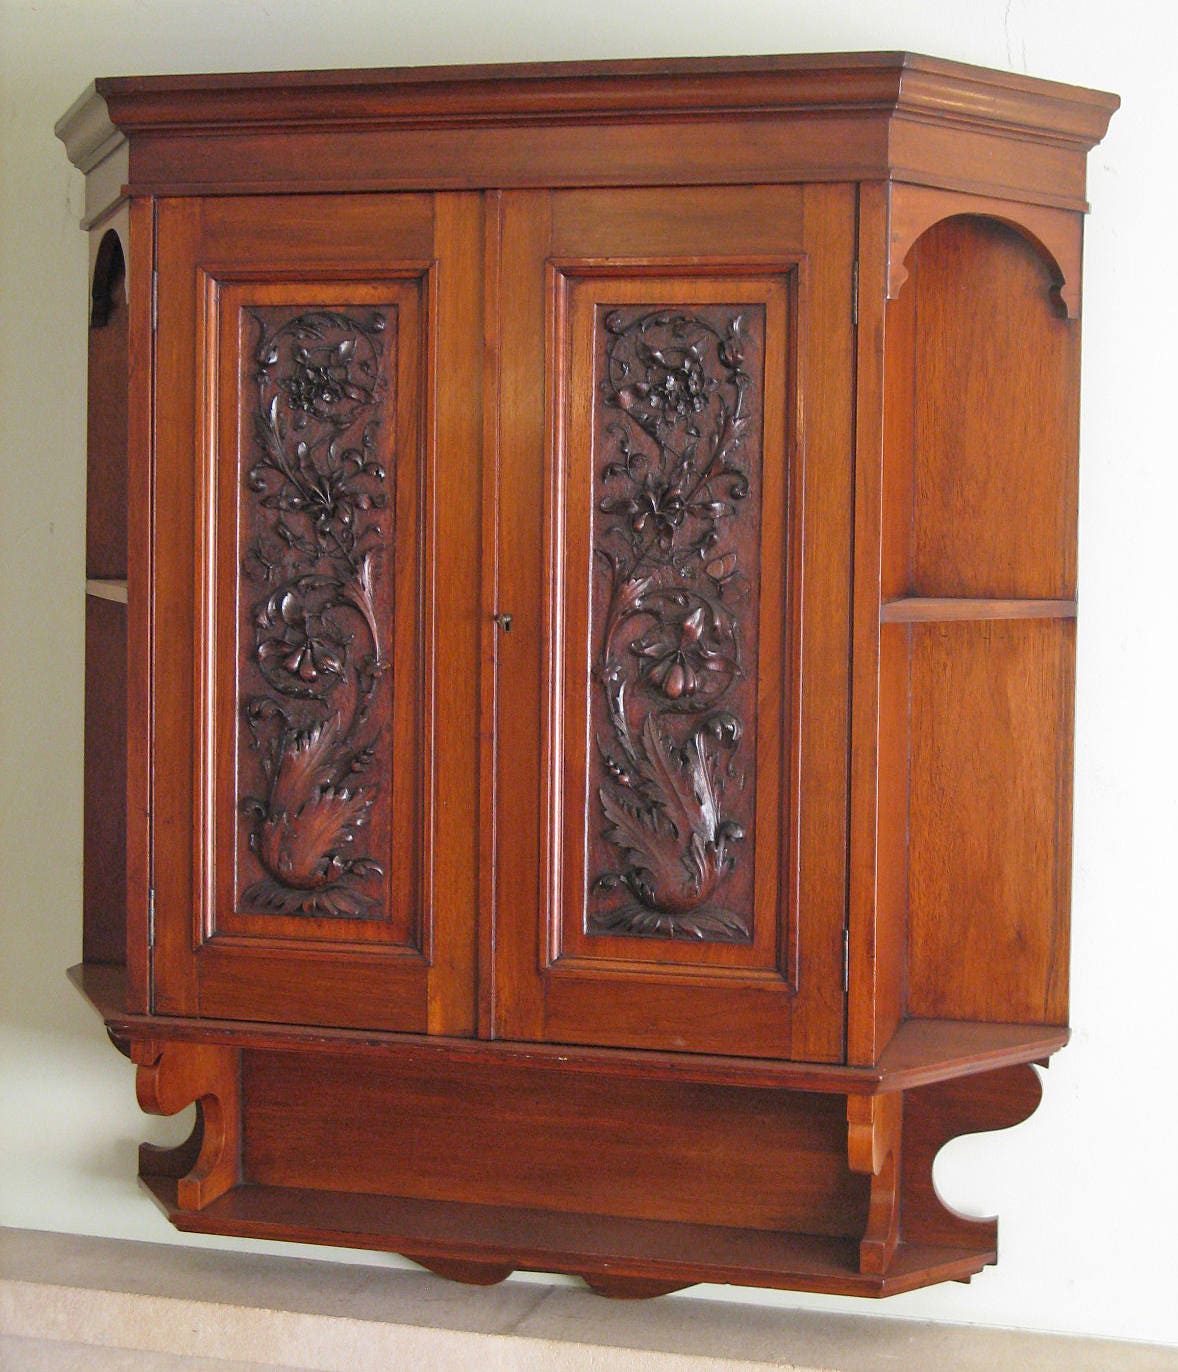 Late Victorian Walnut Wall Hung Cabinet With Carved Door Panels